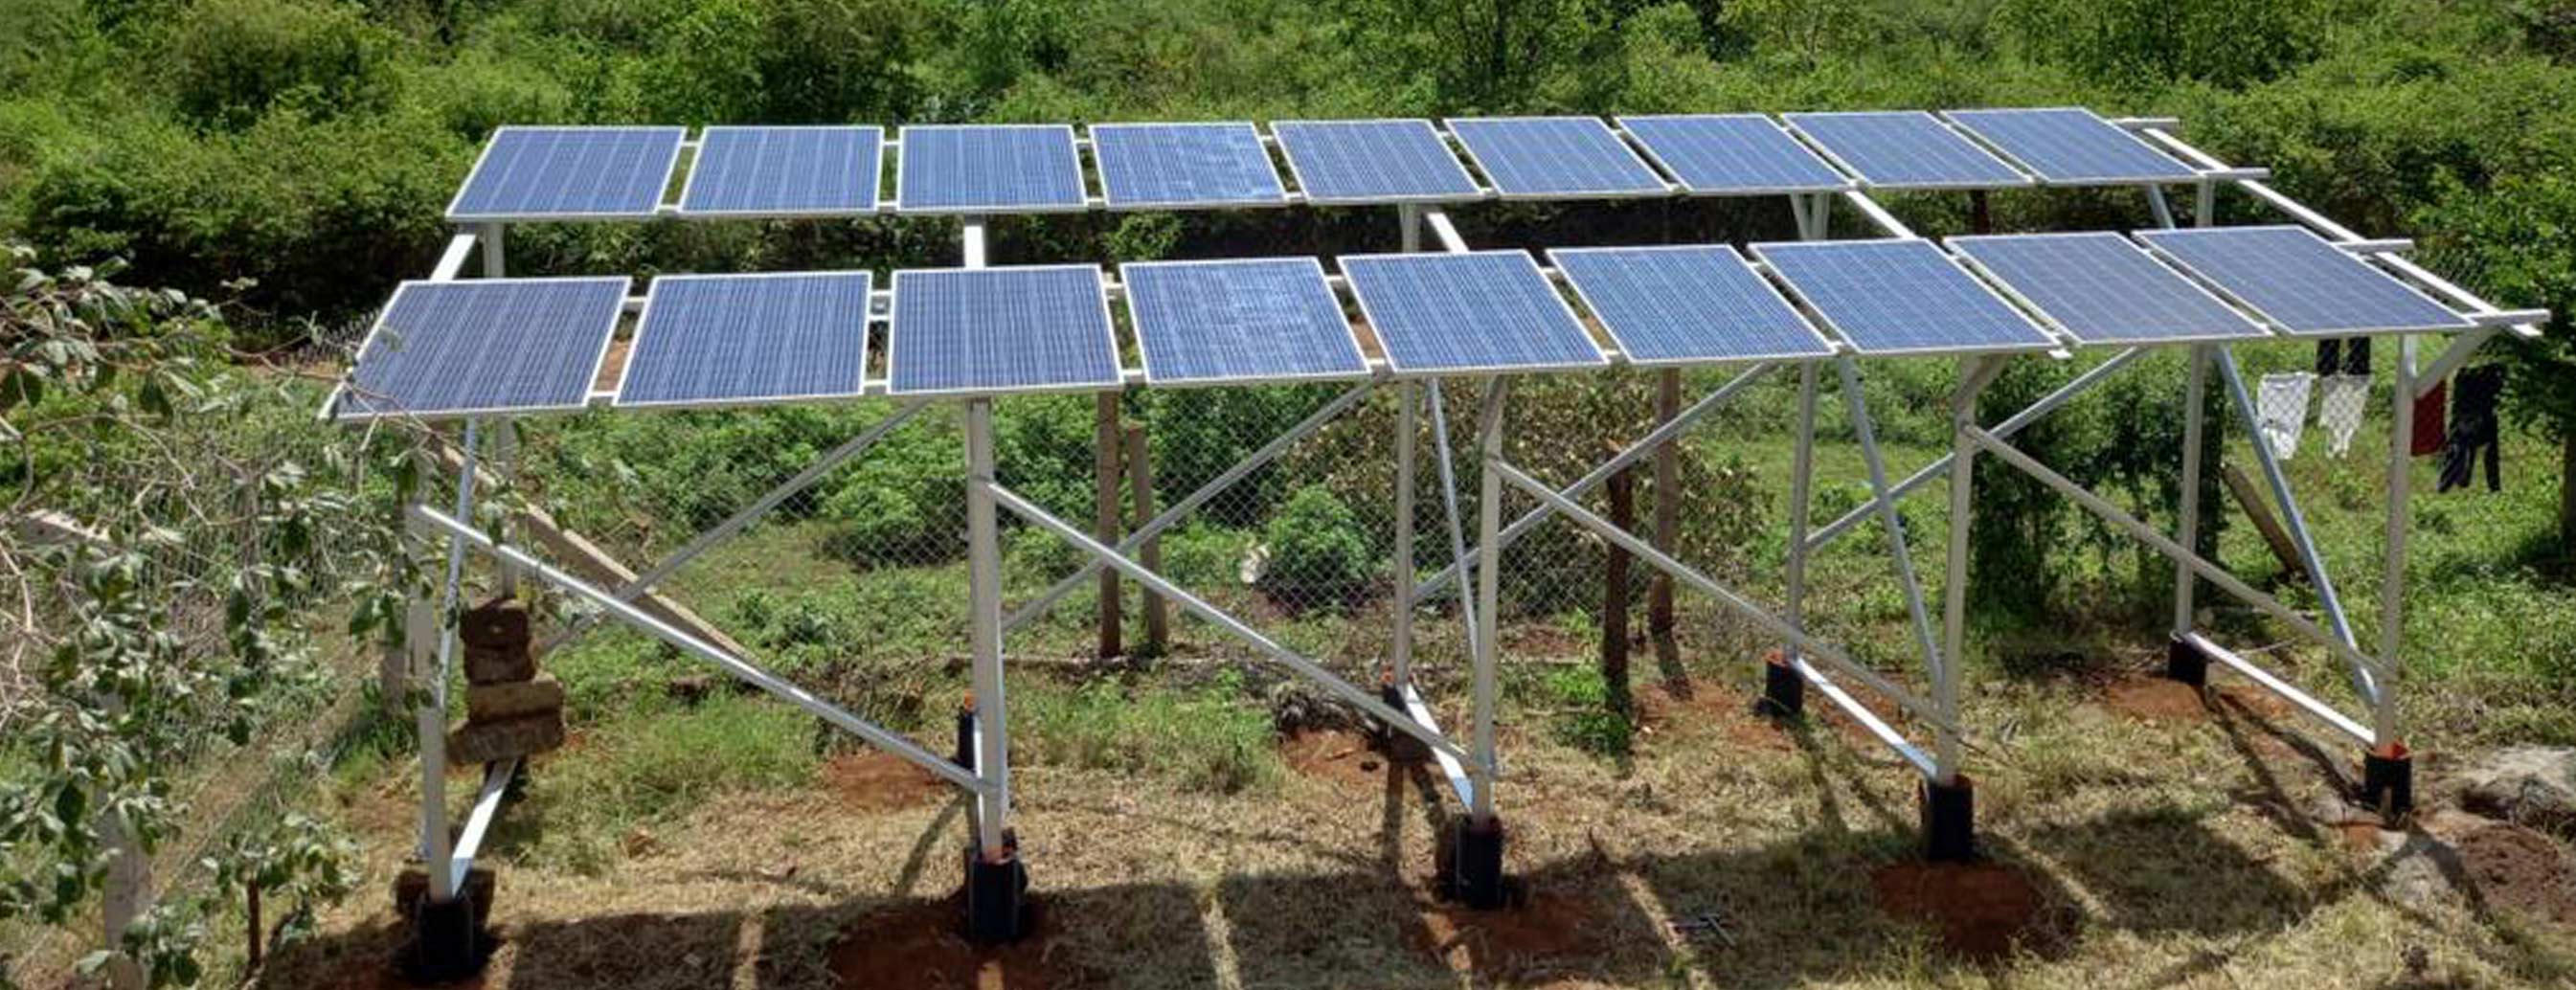 Solar panels used for pumping water, Loise encourages irrigation using solar pumps